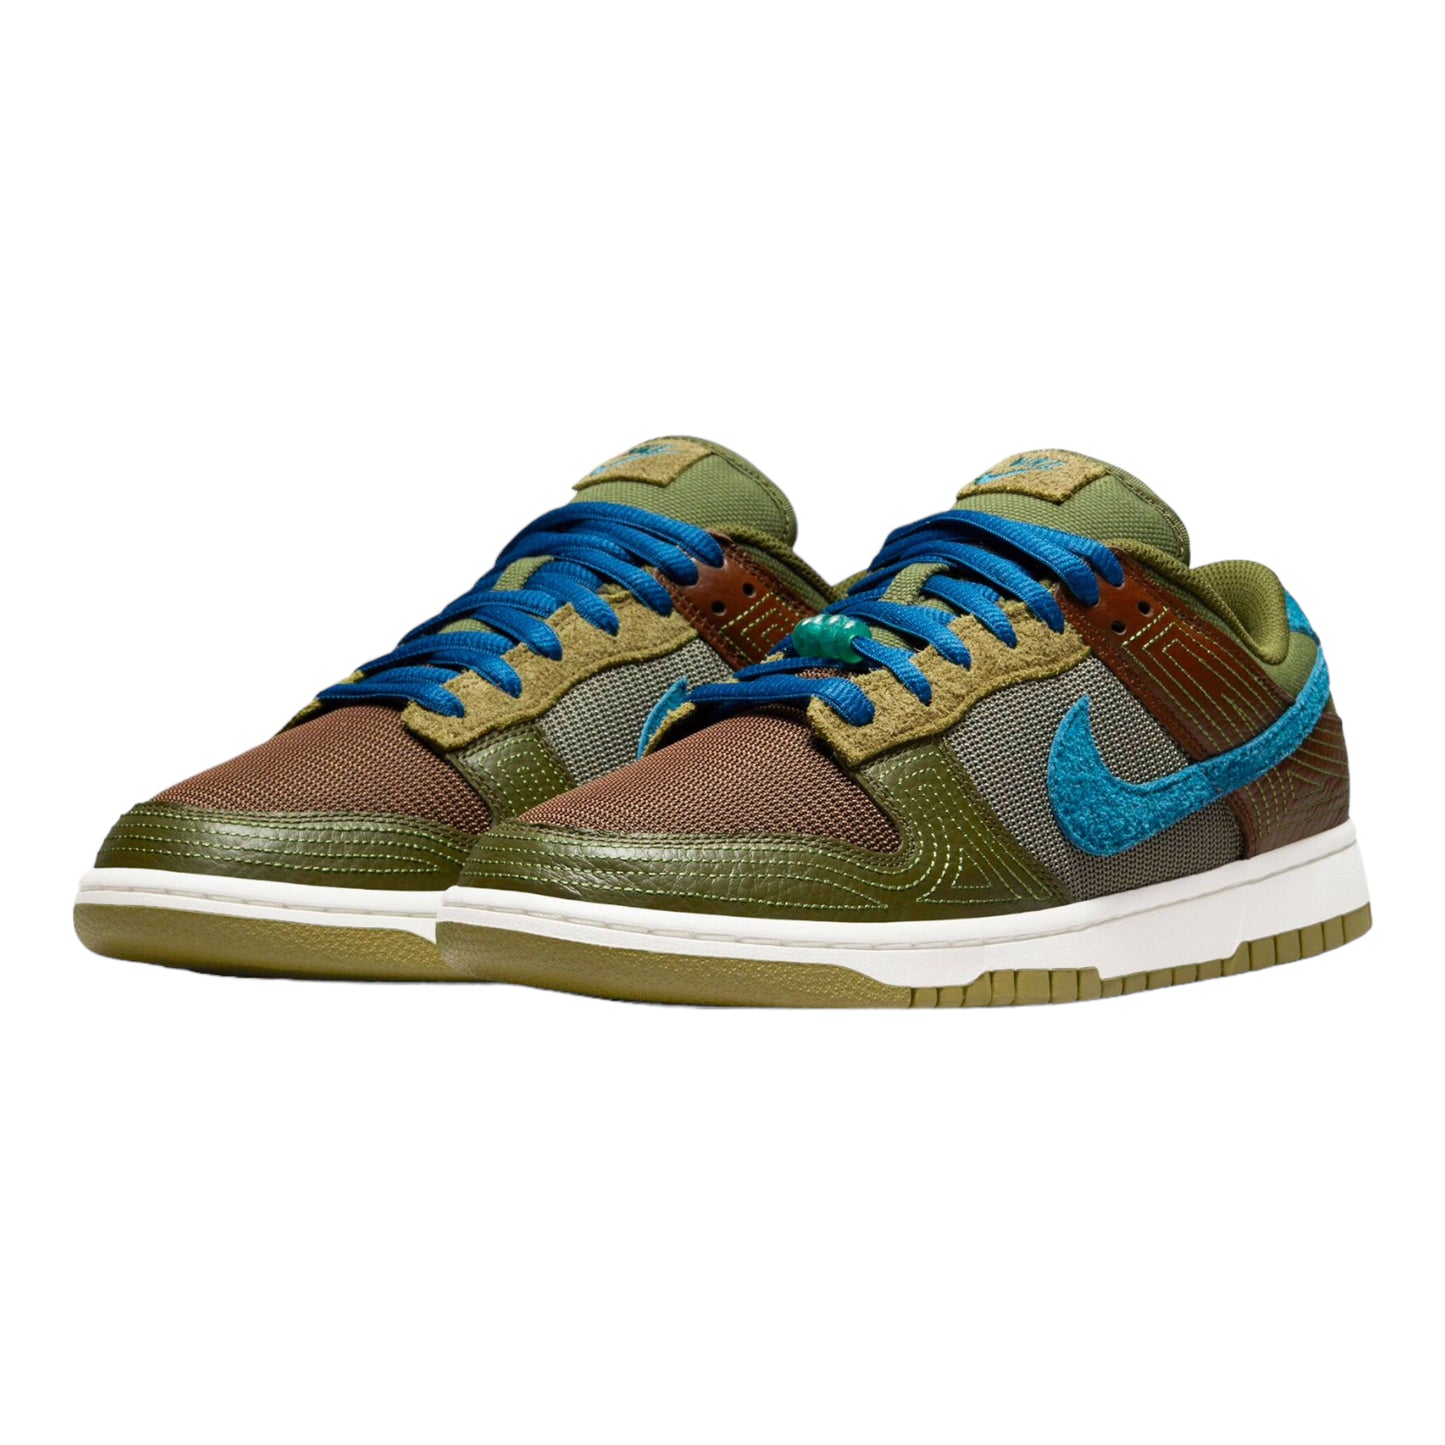 Nike Dunk Low ‘NH Cacao Wow’